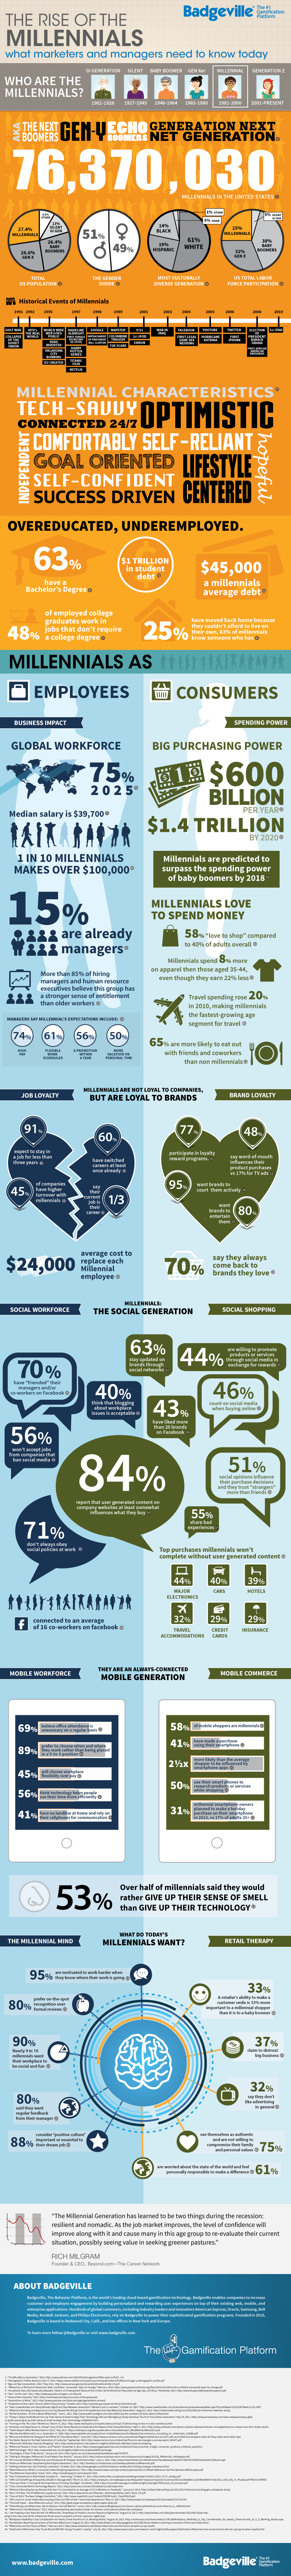 The-Rise-of-the-Millennials-infographic_1